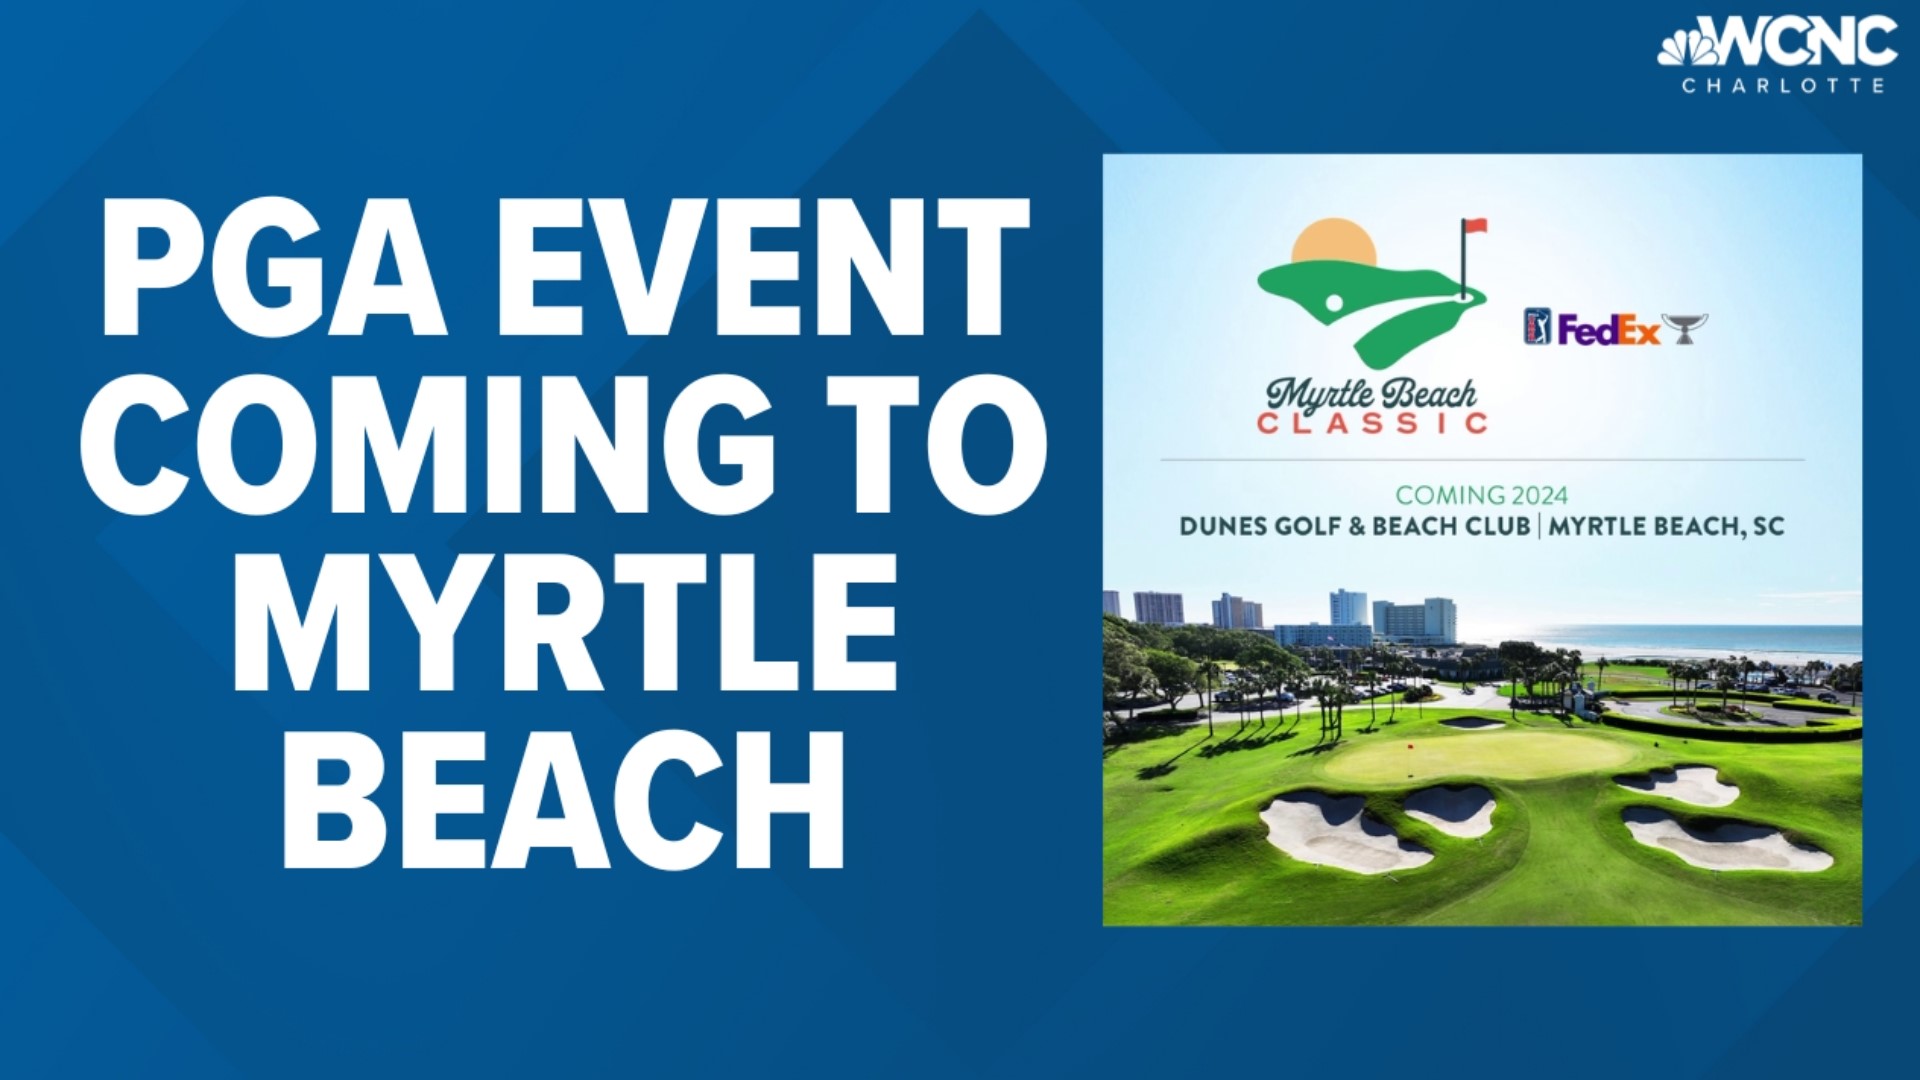 The Myrtle Beach Classic will make its debut in 2024 and will be part of the tour's FedEx Cup regular season.